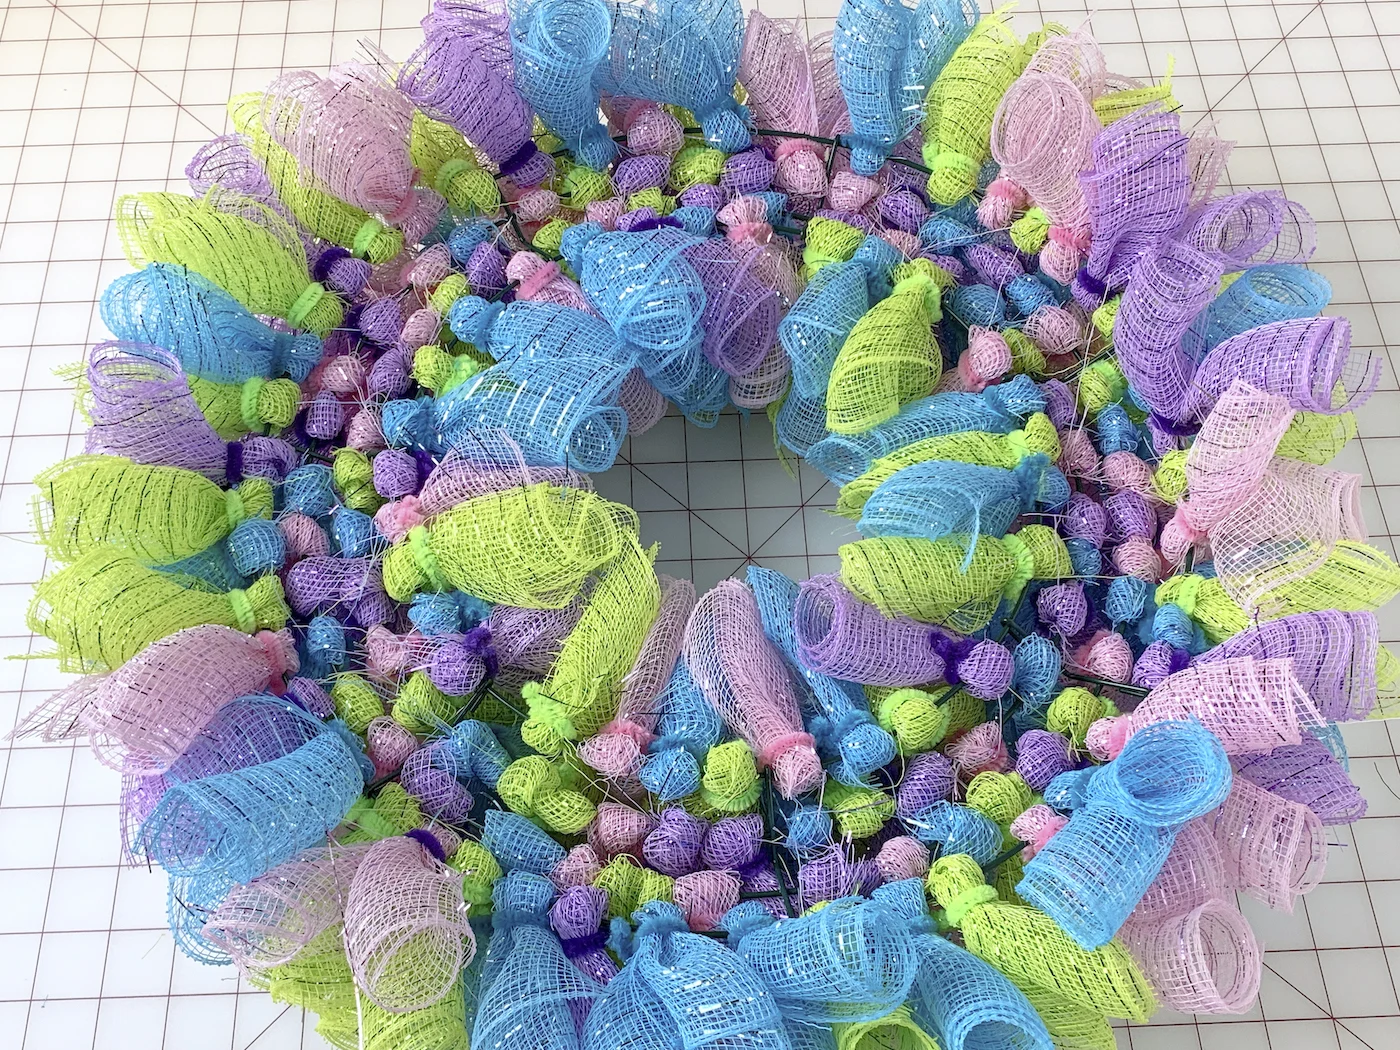 Back of the finished mesh Easter wreath